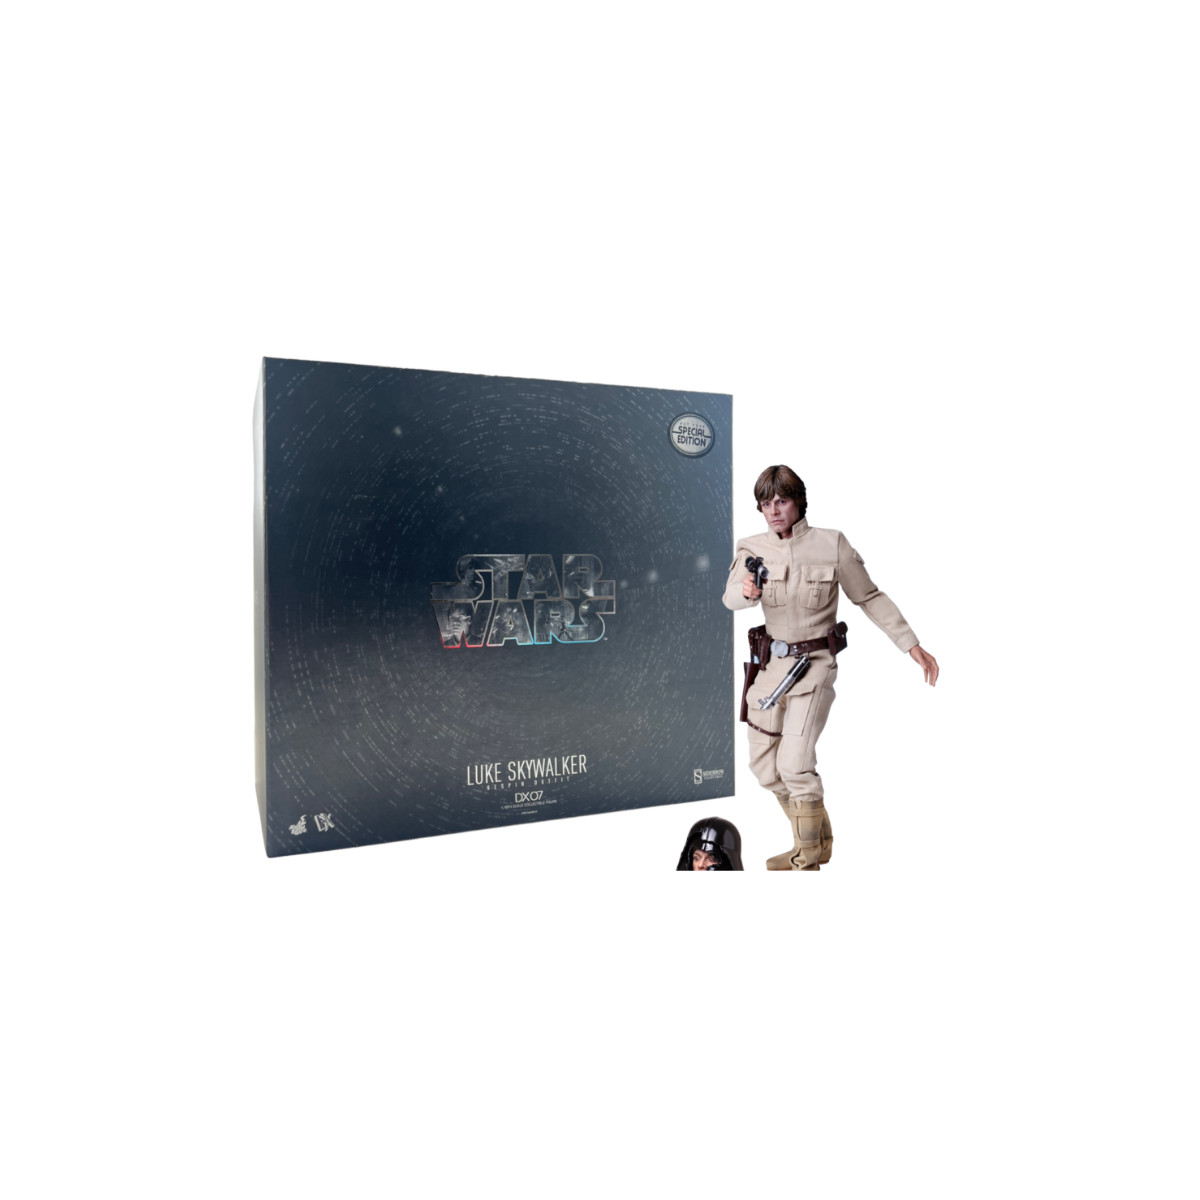 Star Wars Luke Skywalker Bespin Outfit Exclusive Edition